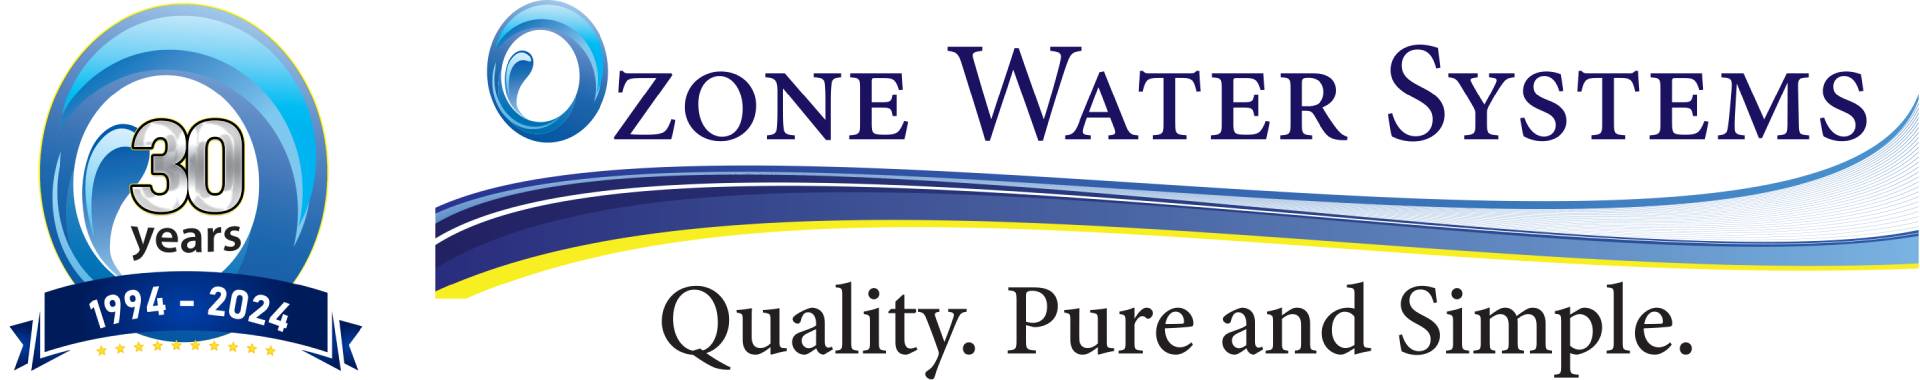 Ozone Water Systems Logo